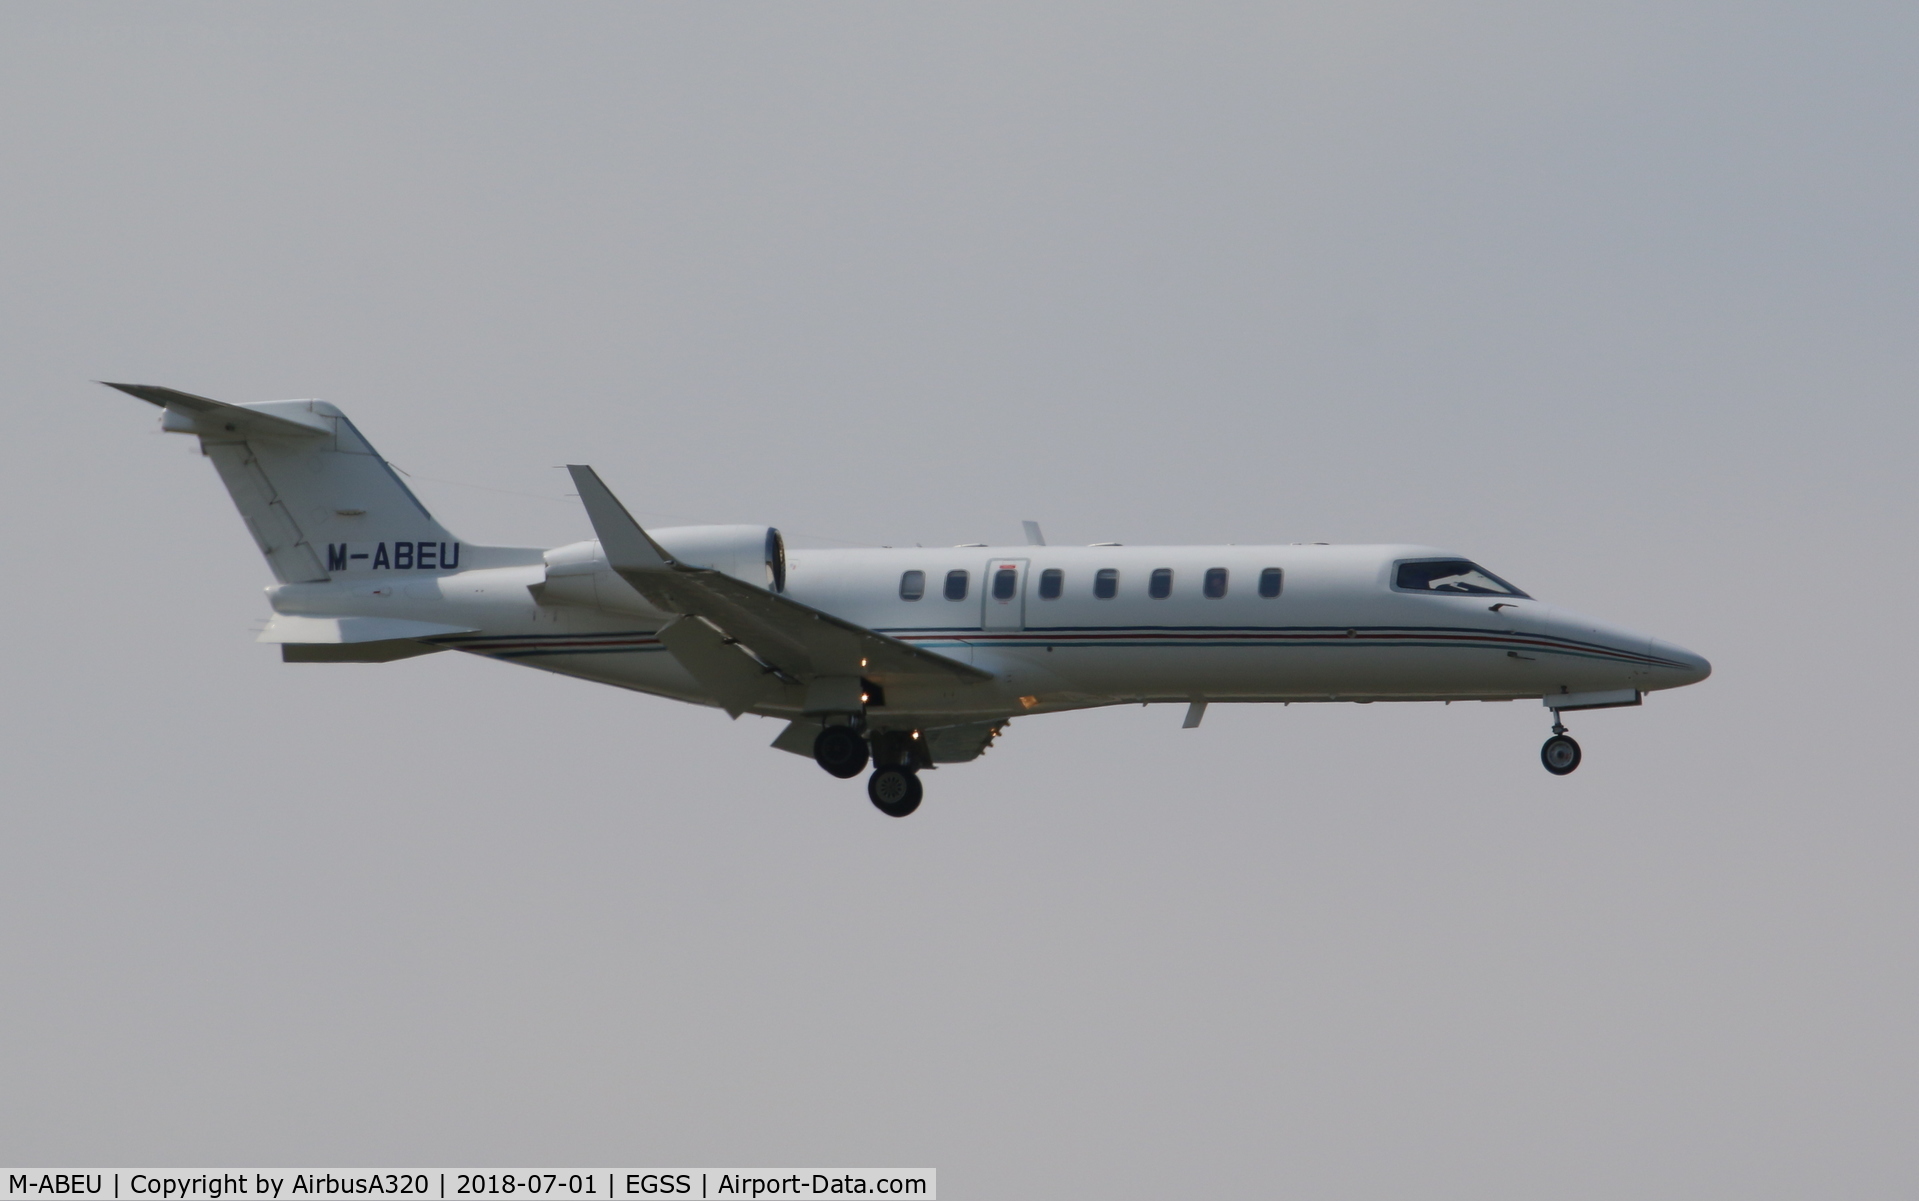 M-ABEU, 2009 Learjet 45 C/N 45-374, arriving at Stansted